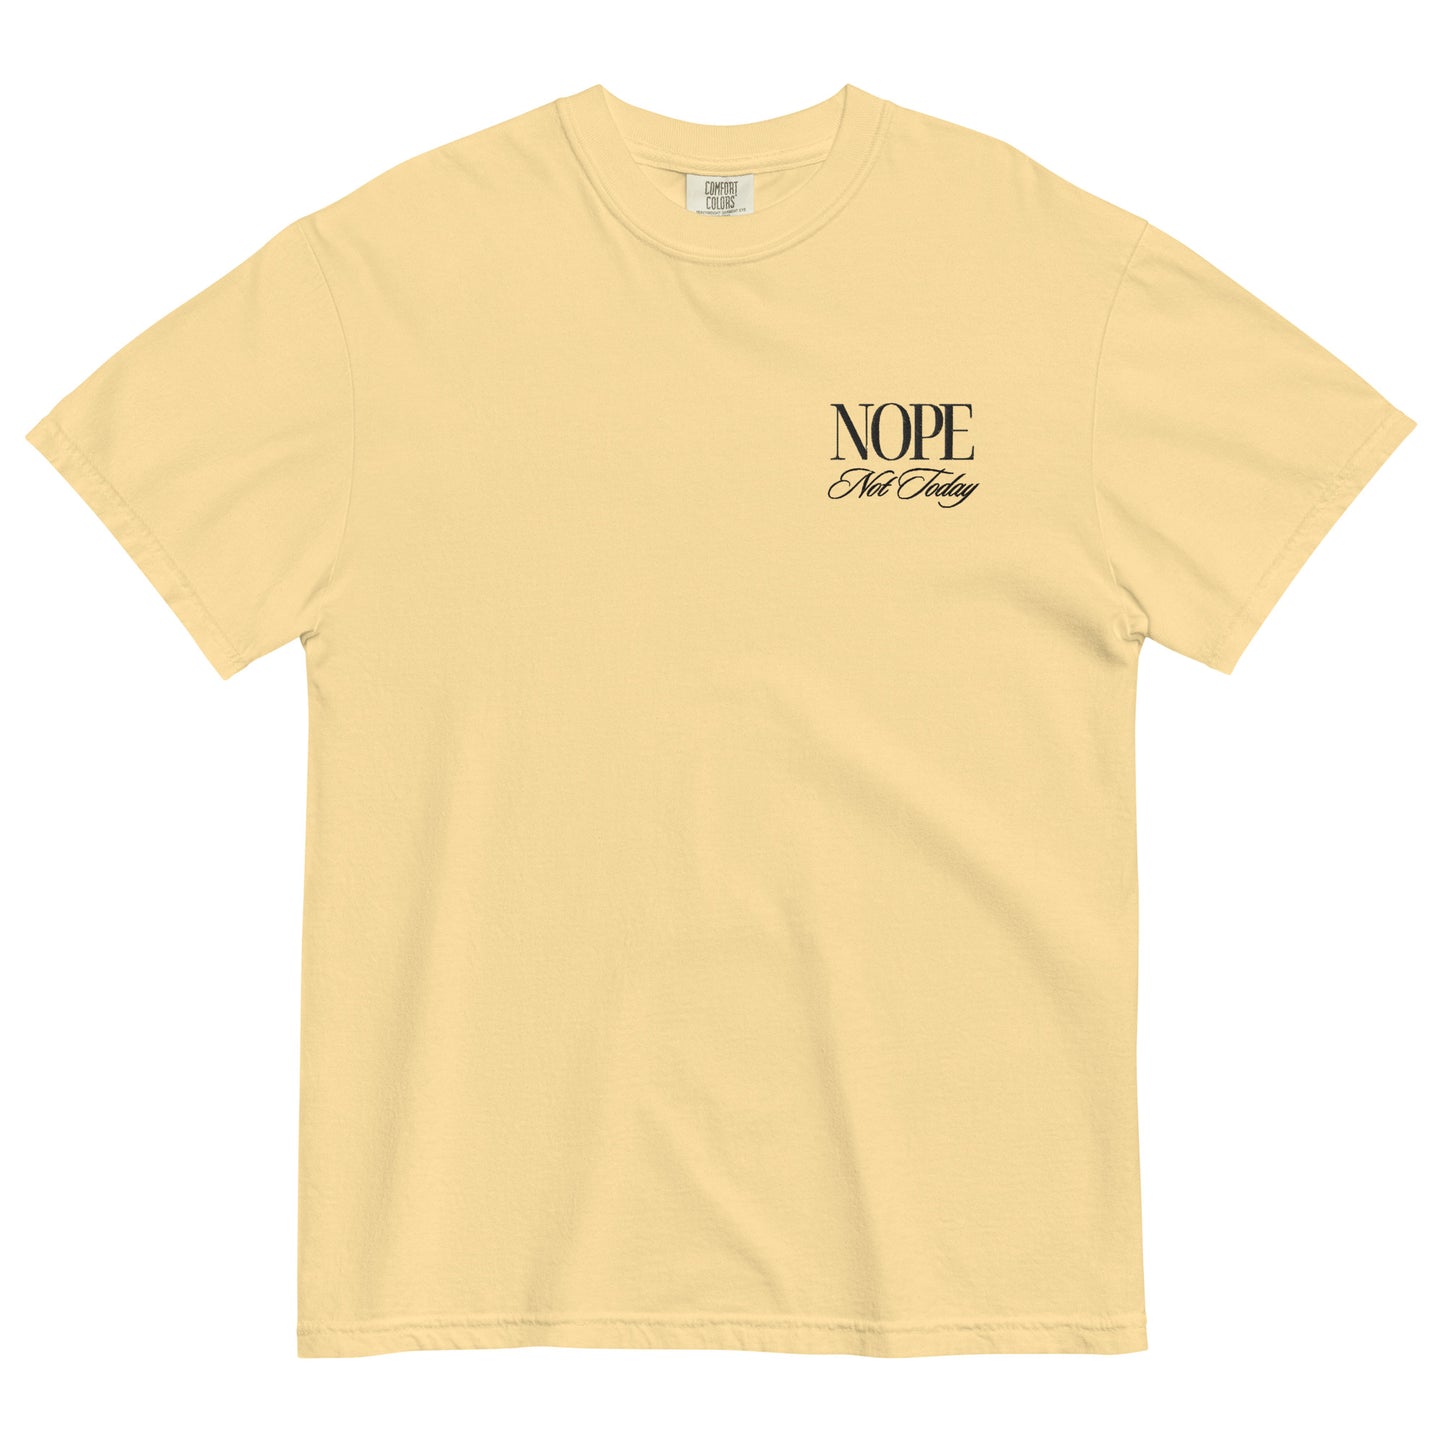 Women's Embroidered "Nope, Not Today" Summer Tee